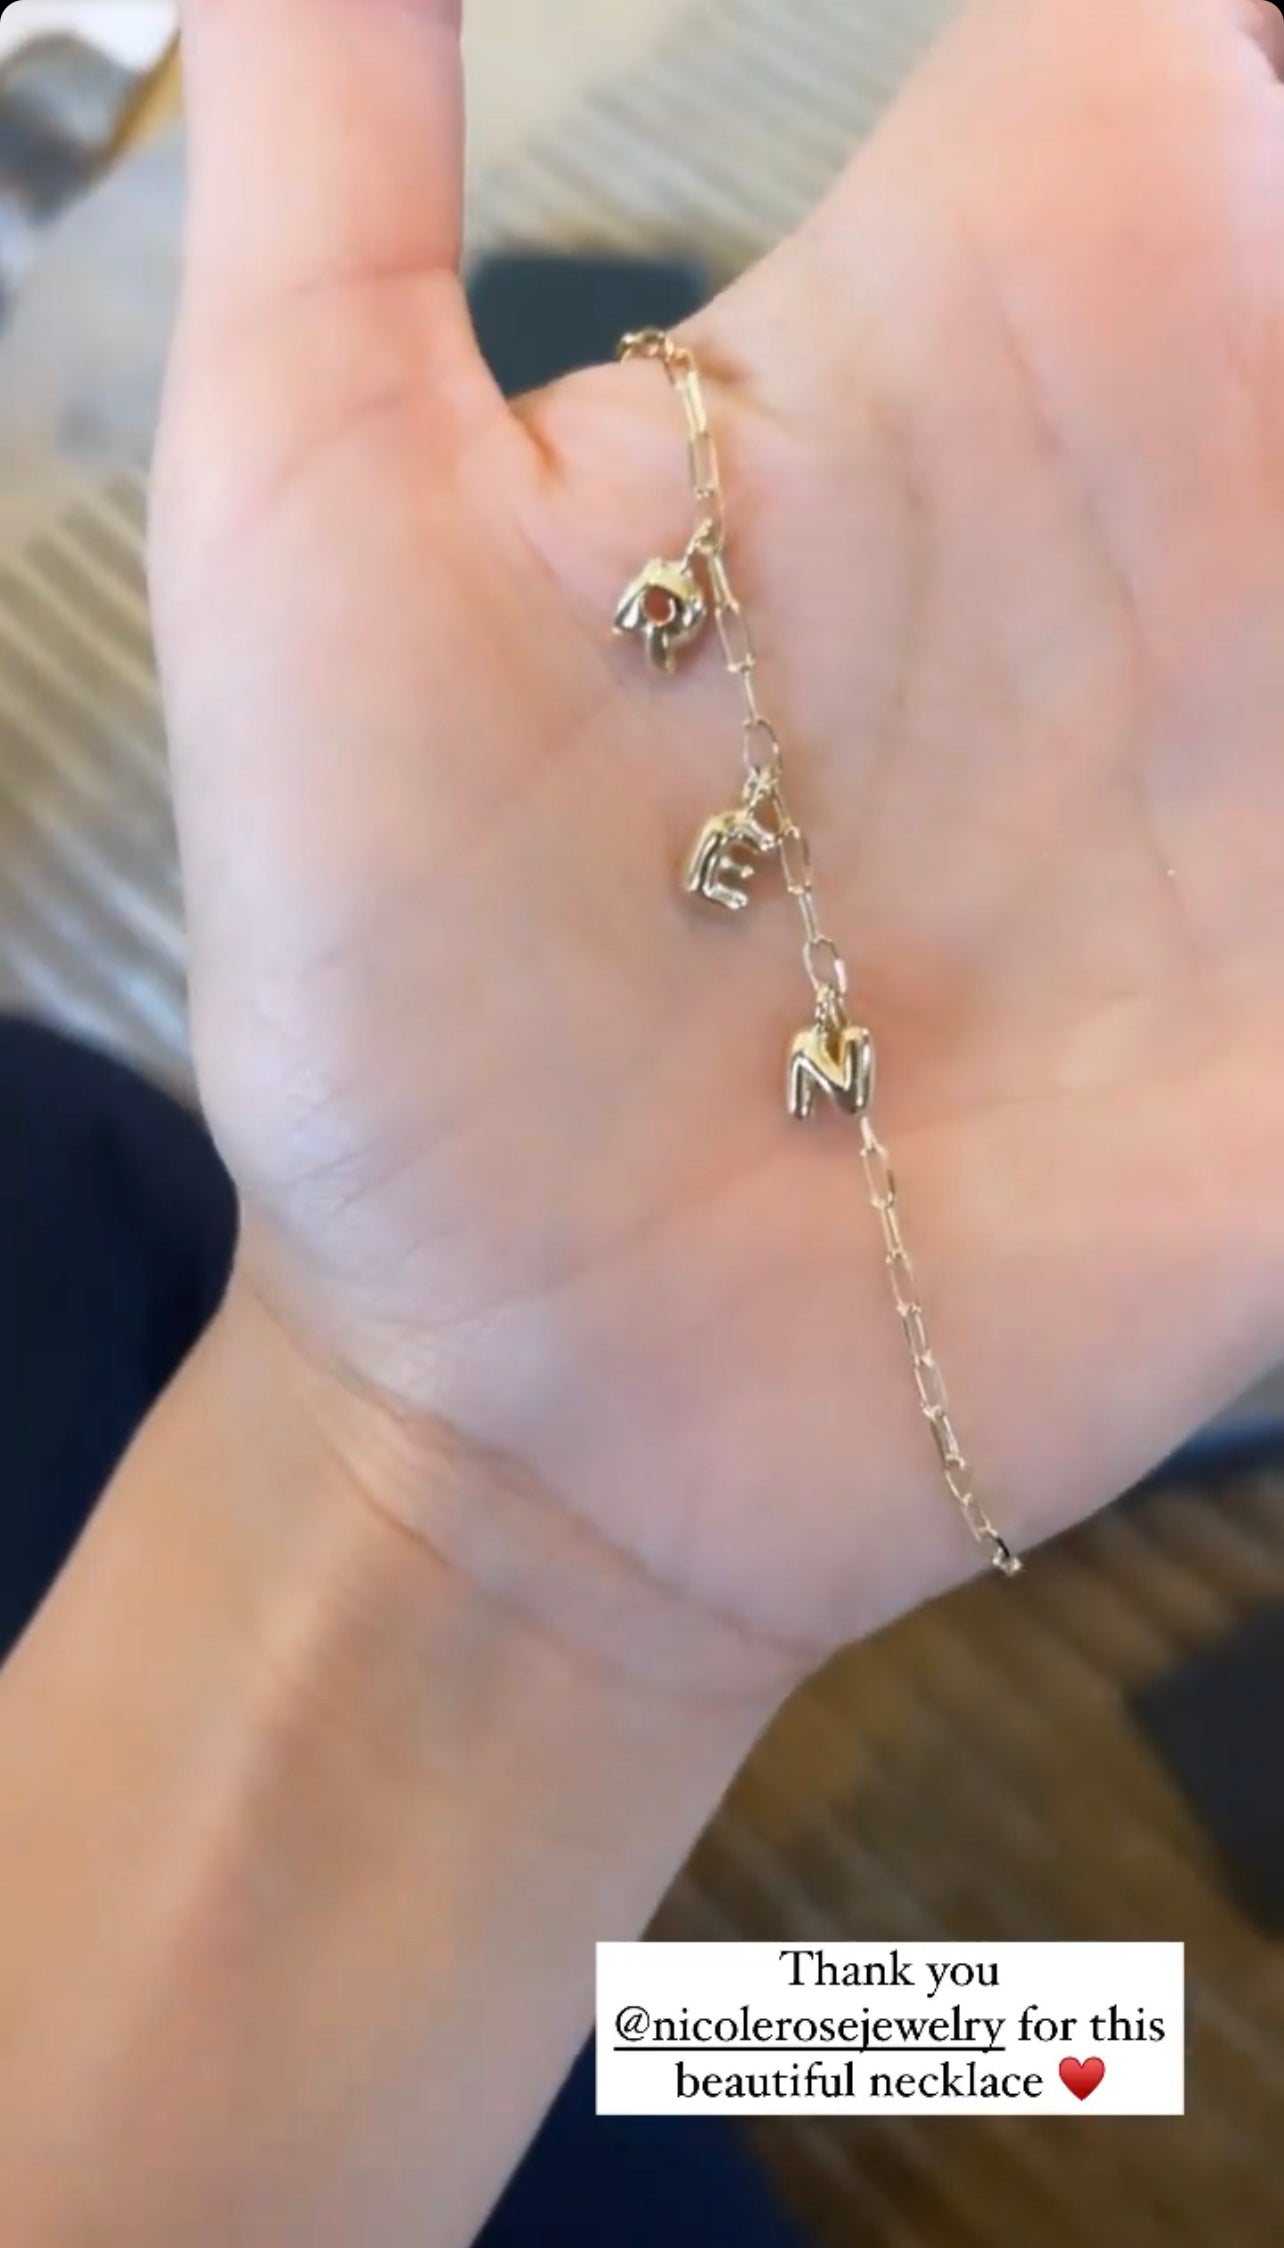 Baby Bubble Charm Necklace - @ariellecharnas 2